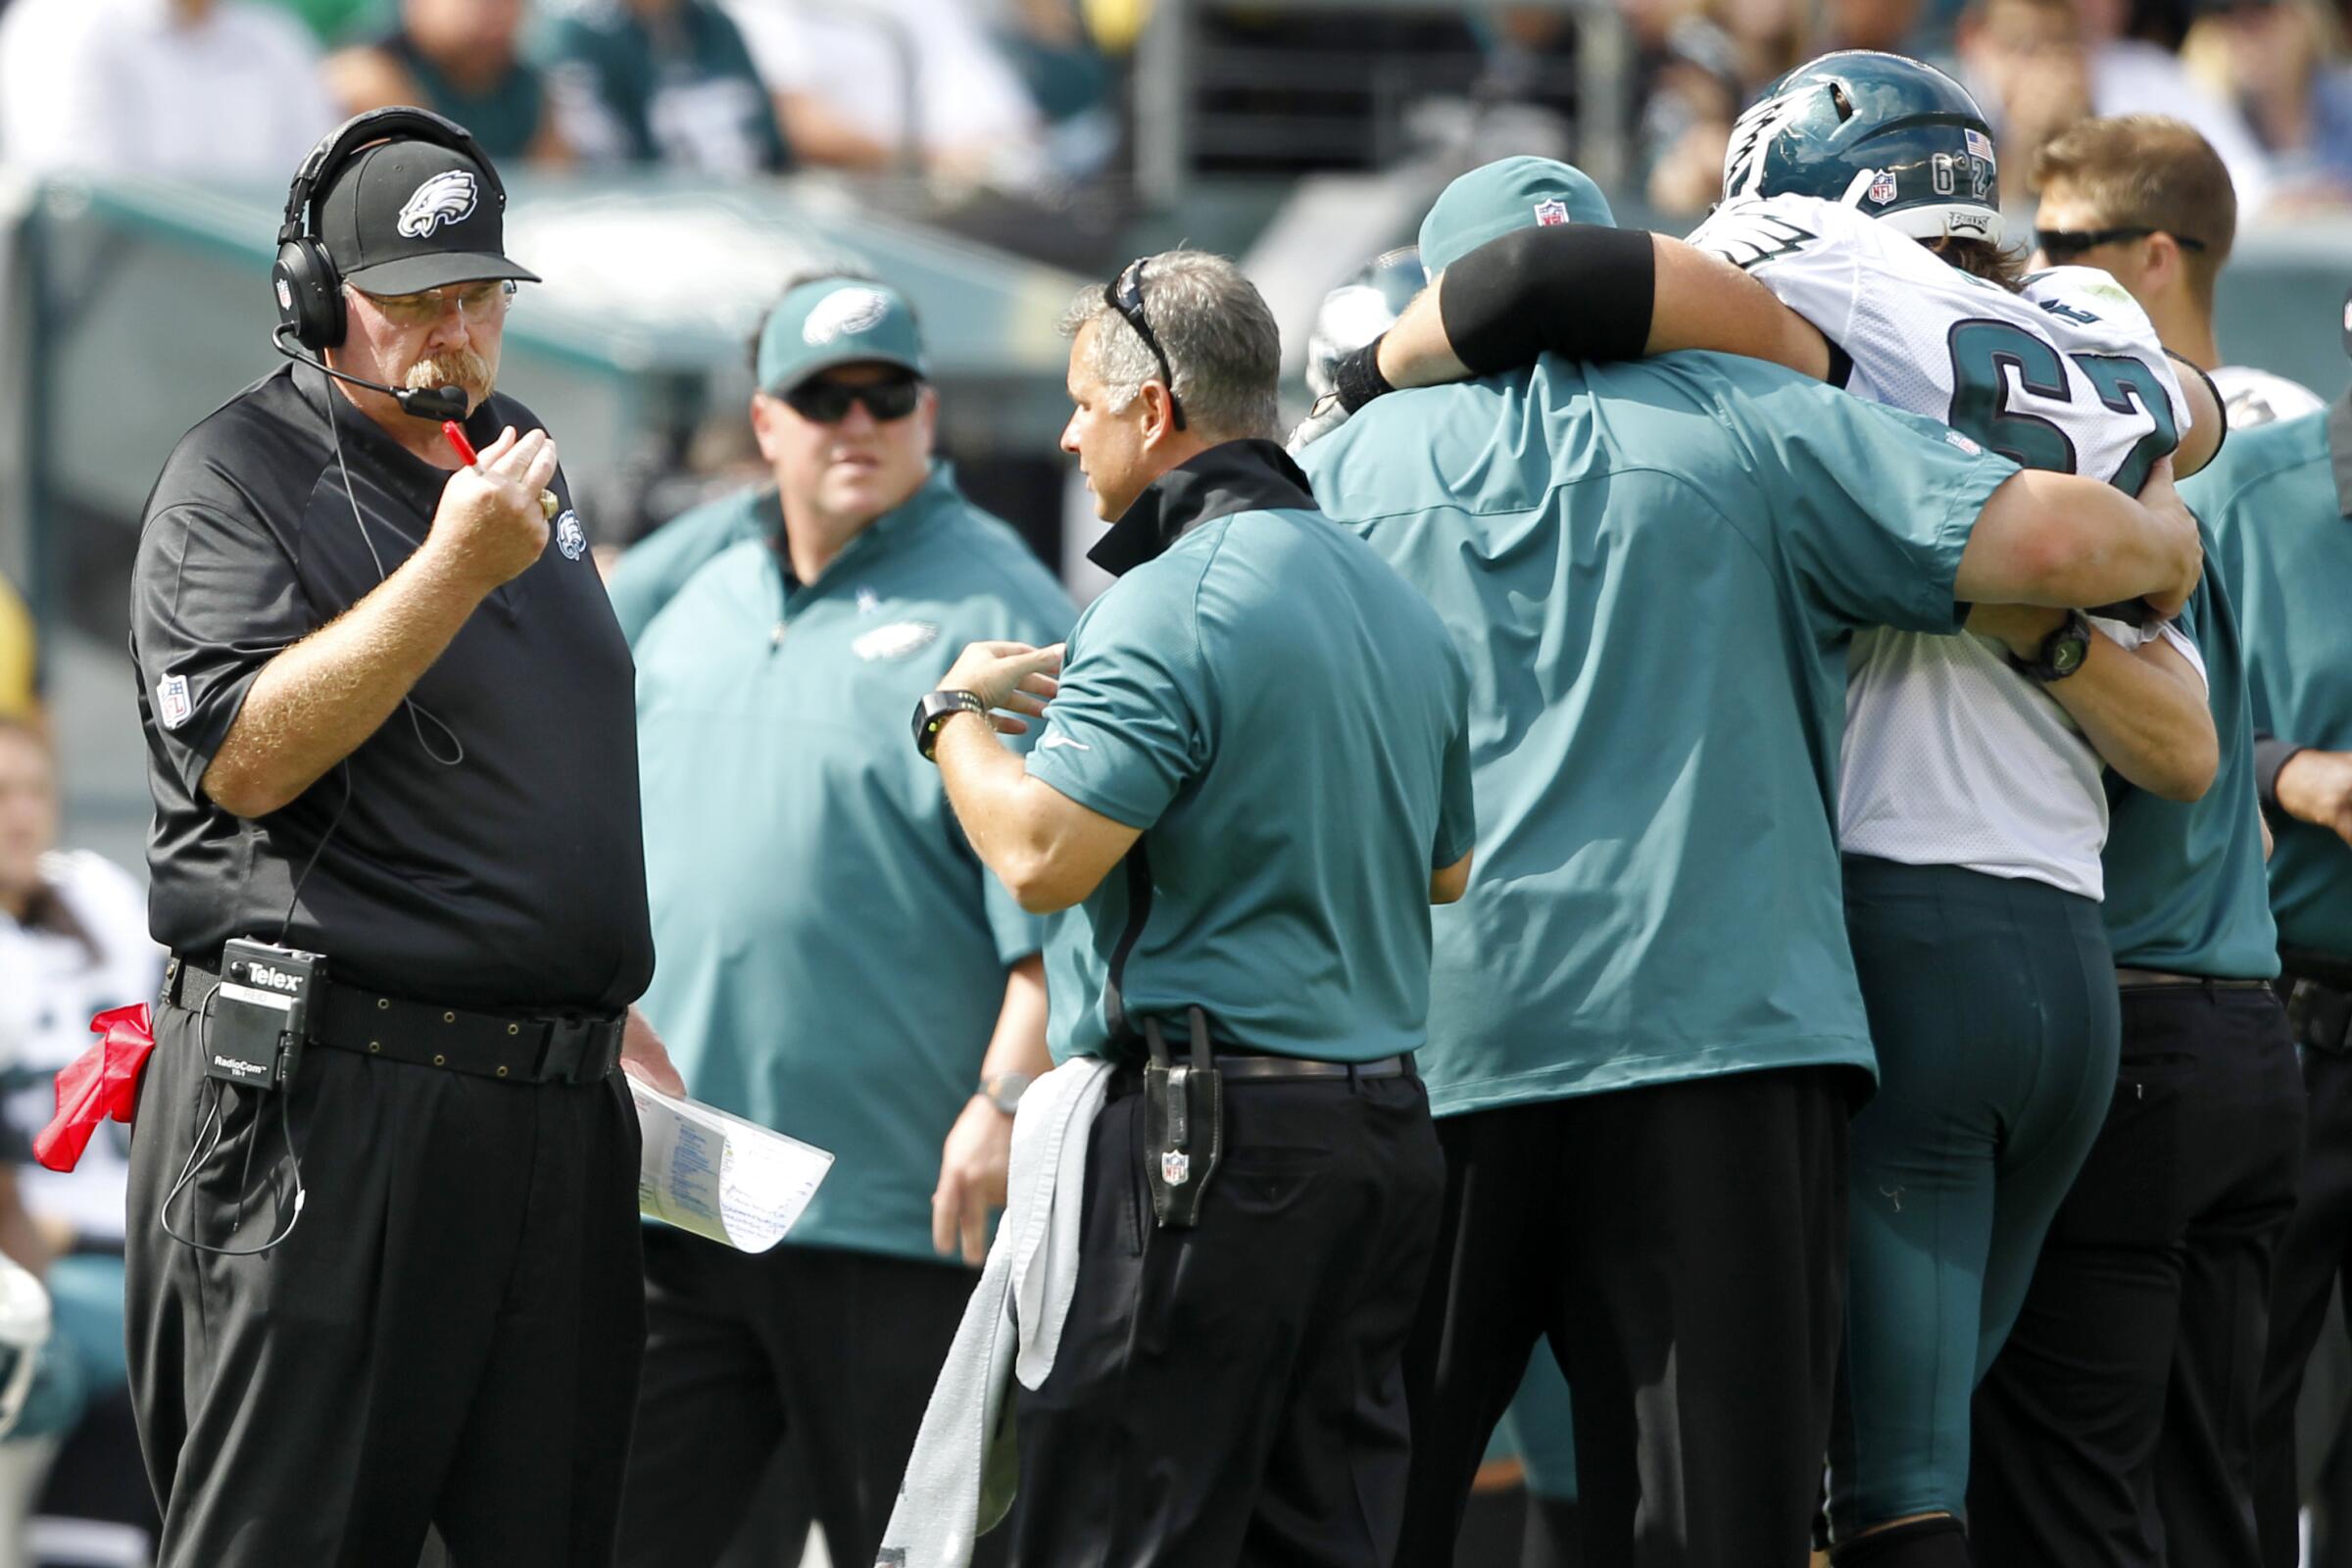  Eagles coach Andy Reid watches as Jason Kelce (62) is helped off the field in 2012.
